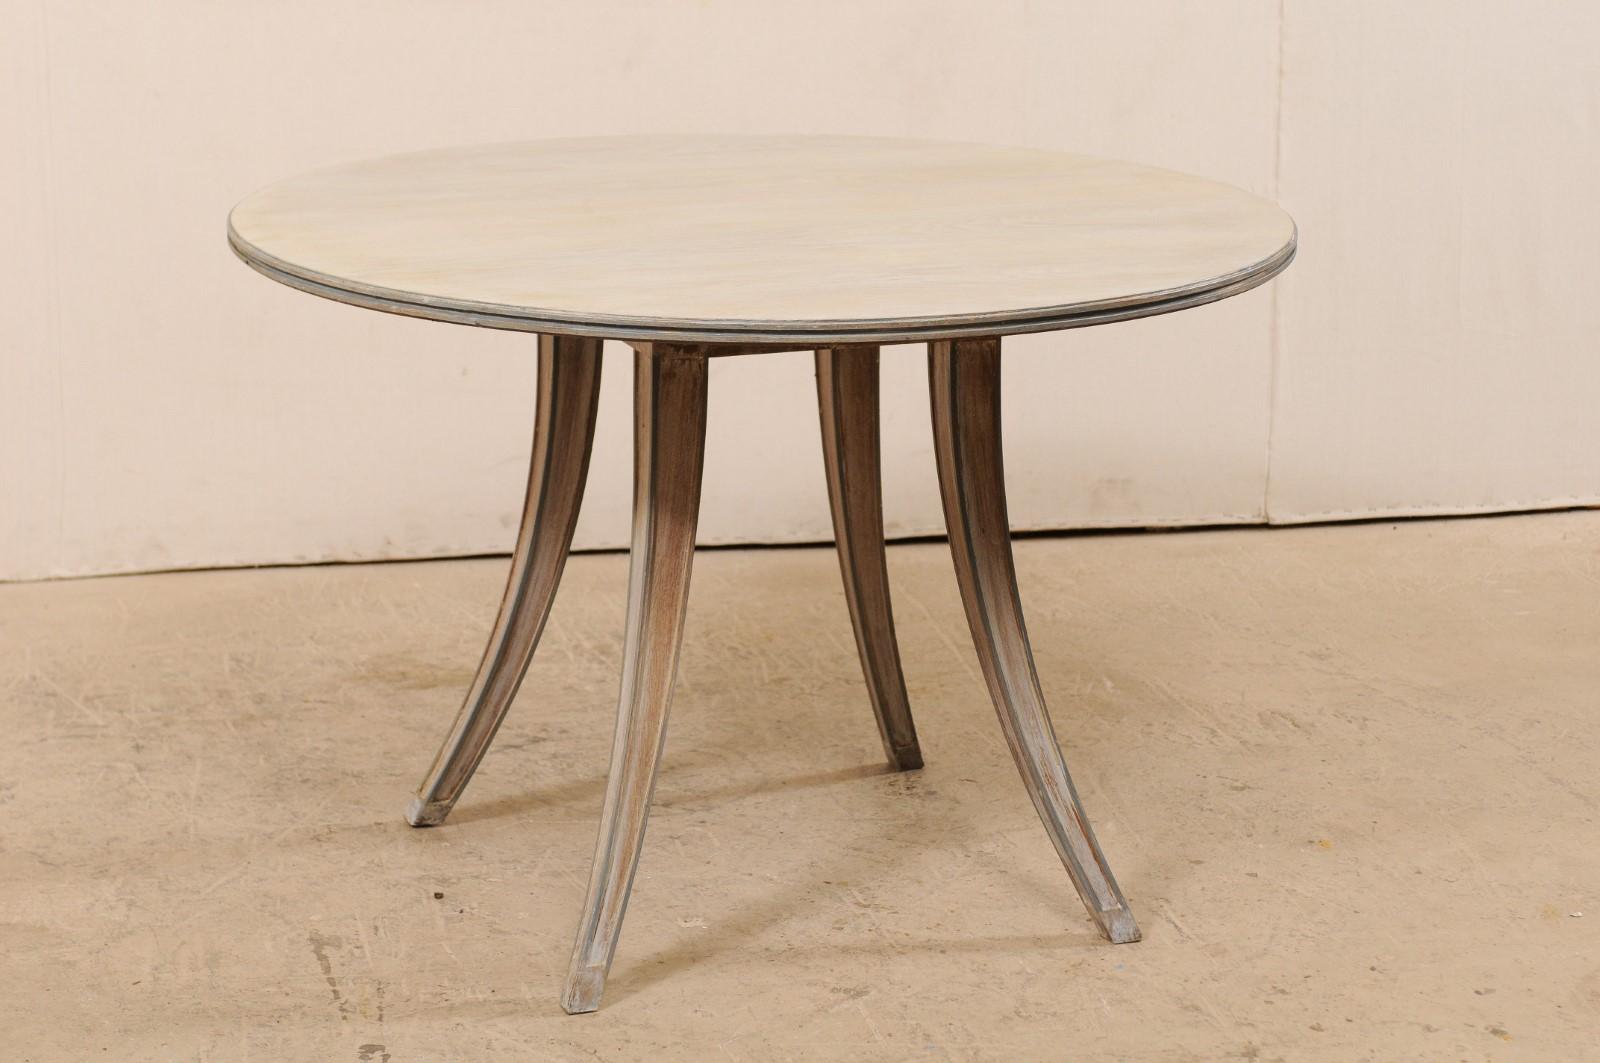 Wood French Mid-century Modern Dining or Center Table, Transitions from Oval to Round